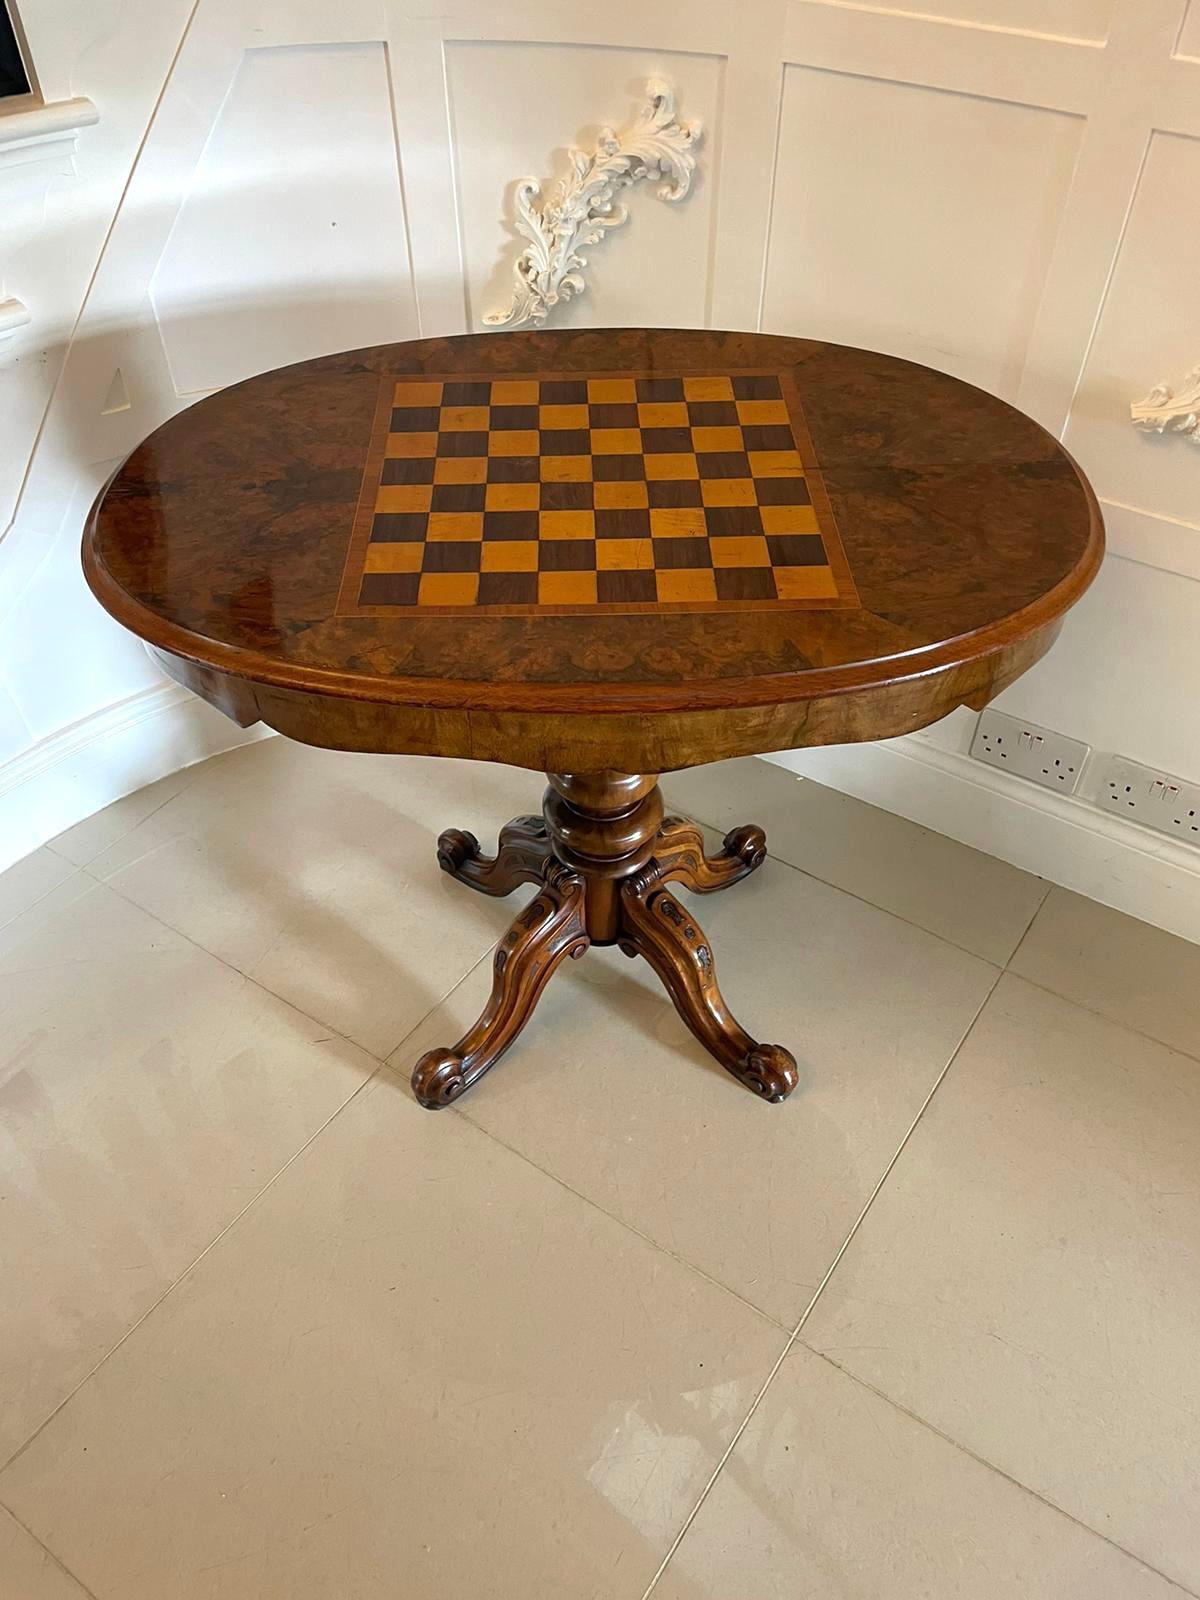 Rare antique Victorian quality figured walnut patent games table by Wilson & Co having a quality oval figured walnut lift off top with a thumb moulded edge and an inlaid chess board to the centre opening to reveal an unusual patent board game with